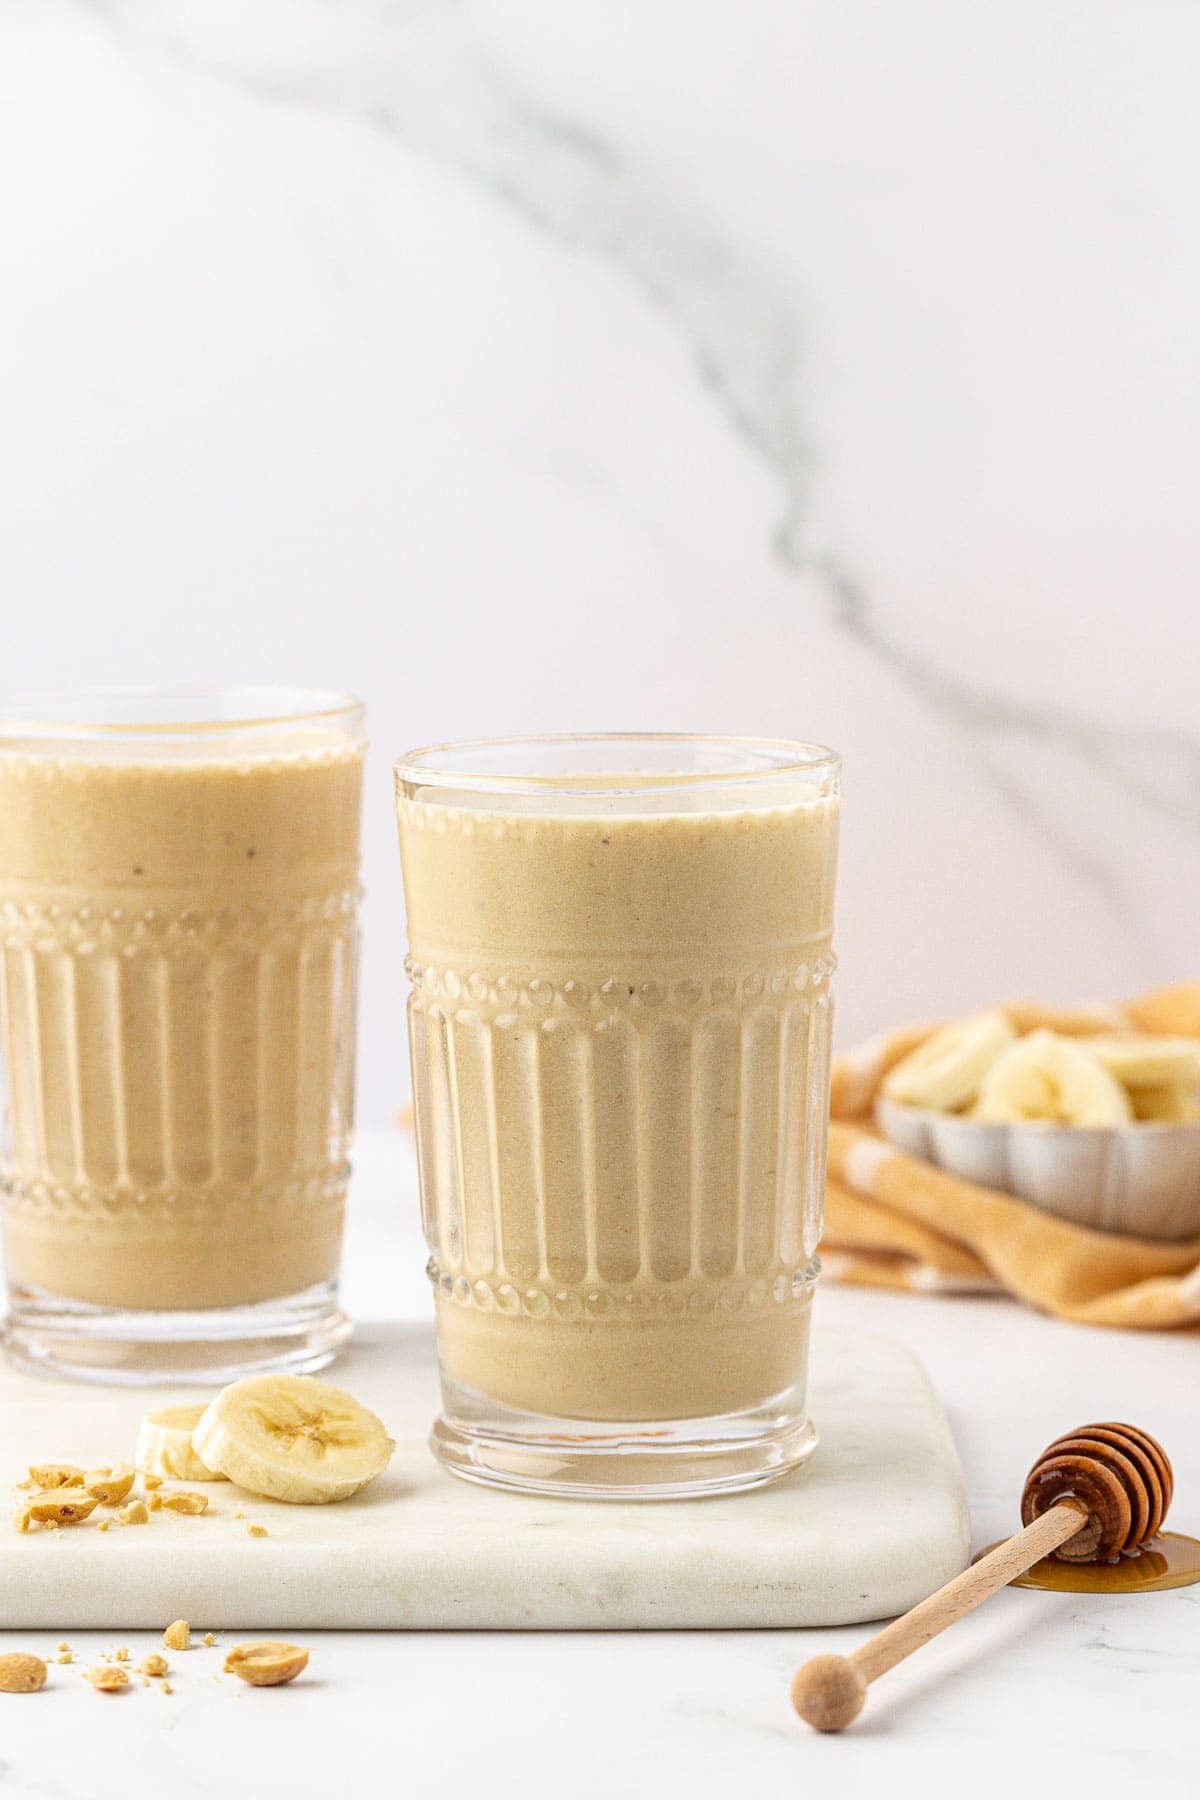 peanut butter banana smoothie in a glass